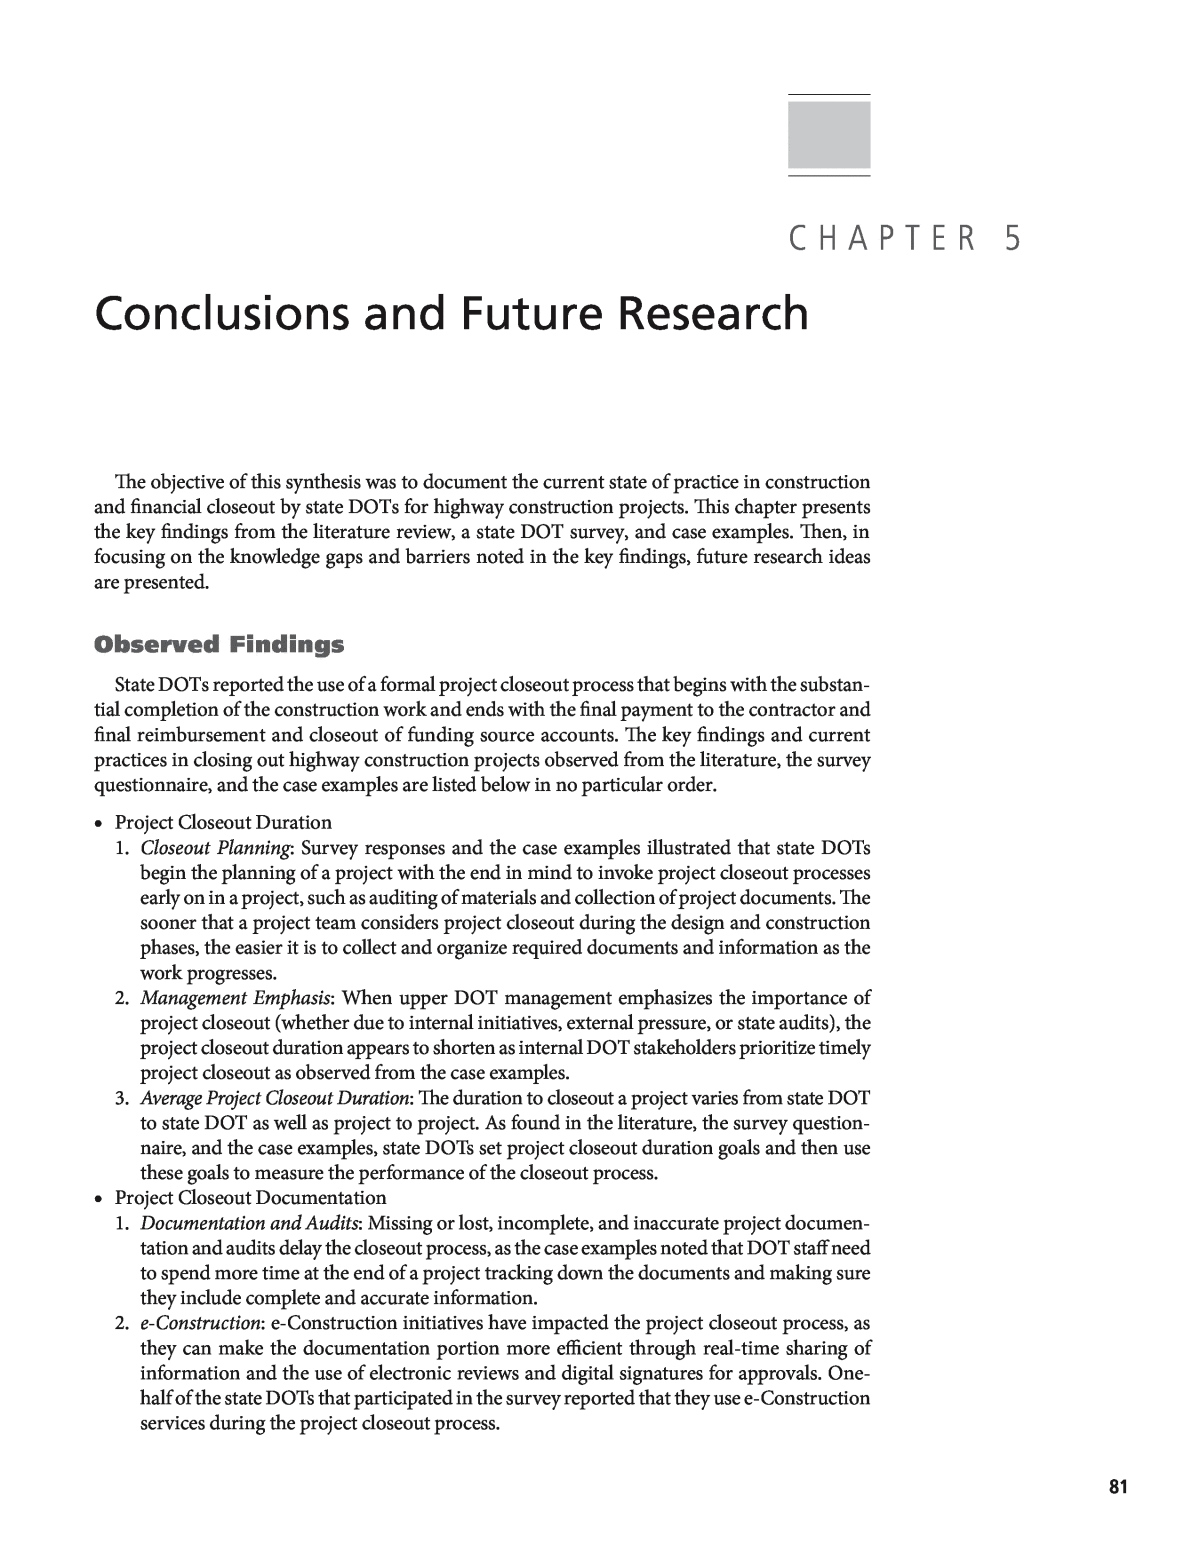 Chapter 5 - Conclusions and Future Research, Practices for Closing Out  Highway Projects from Substantial Completion to Final Payment